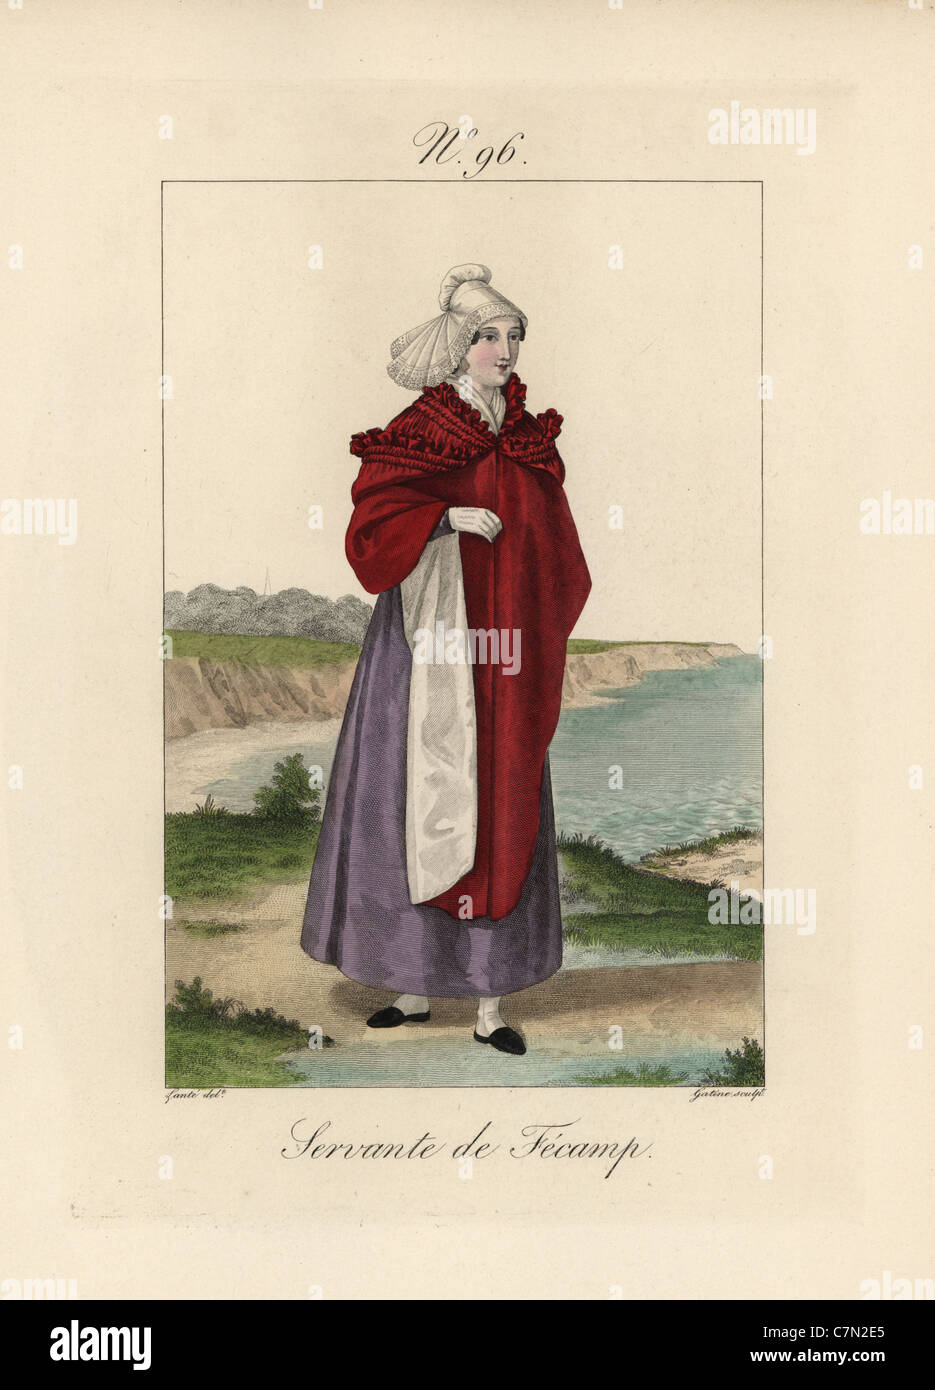 Servant of Fecamp. If the bonnet is simple, the cape with hood is very  ornate with double collar and pleated decorated edges Stock Photo - Alamy